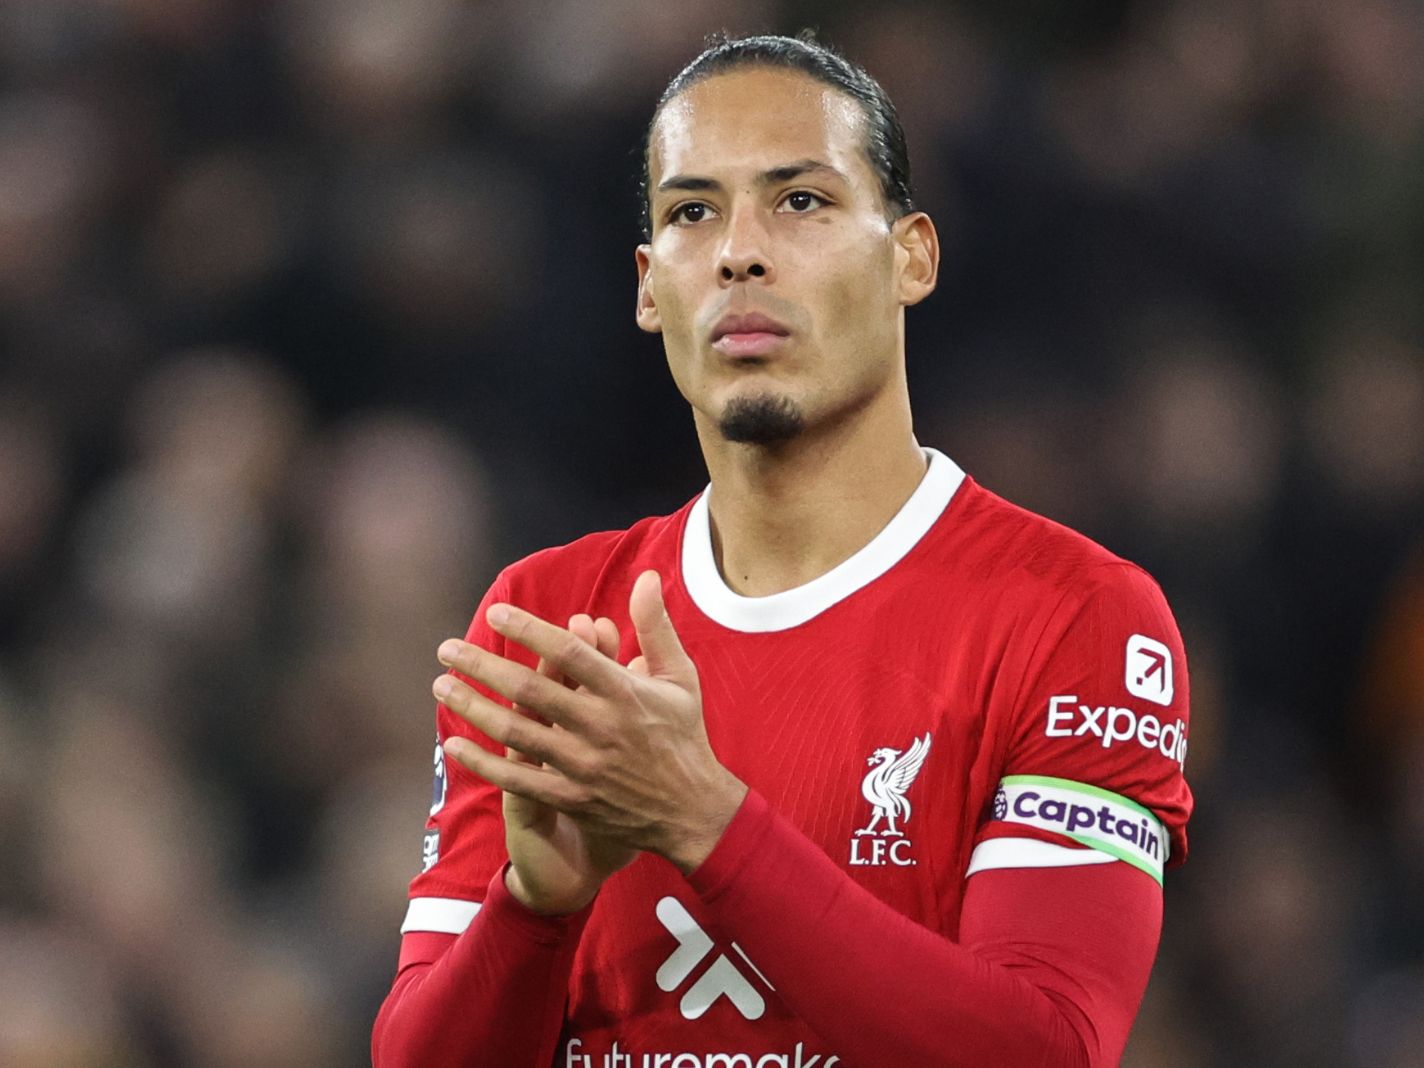 Throwback Photo of Arne Slot Crossing Paths with Virgil van Dijk on the Pitch Goes Viral